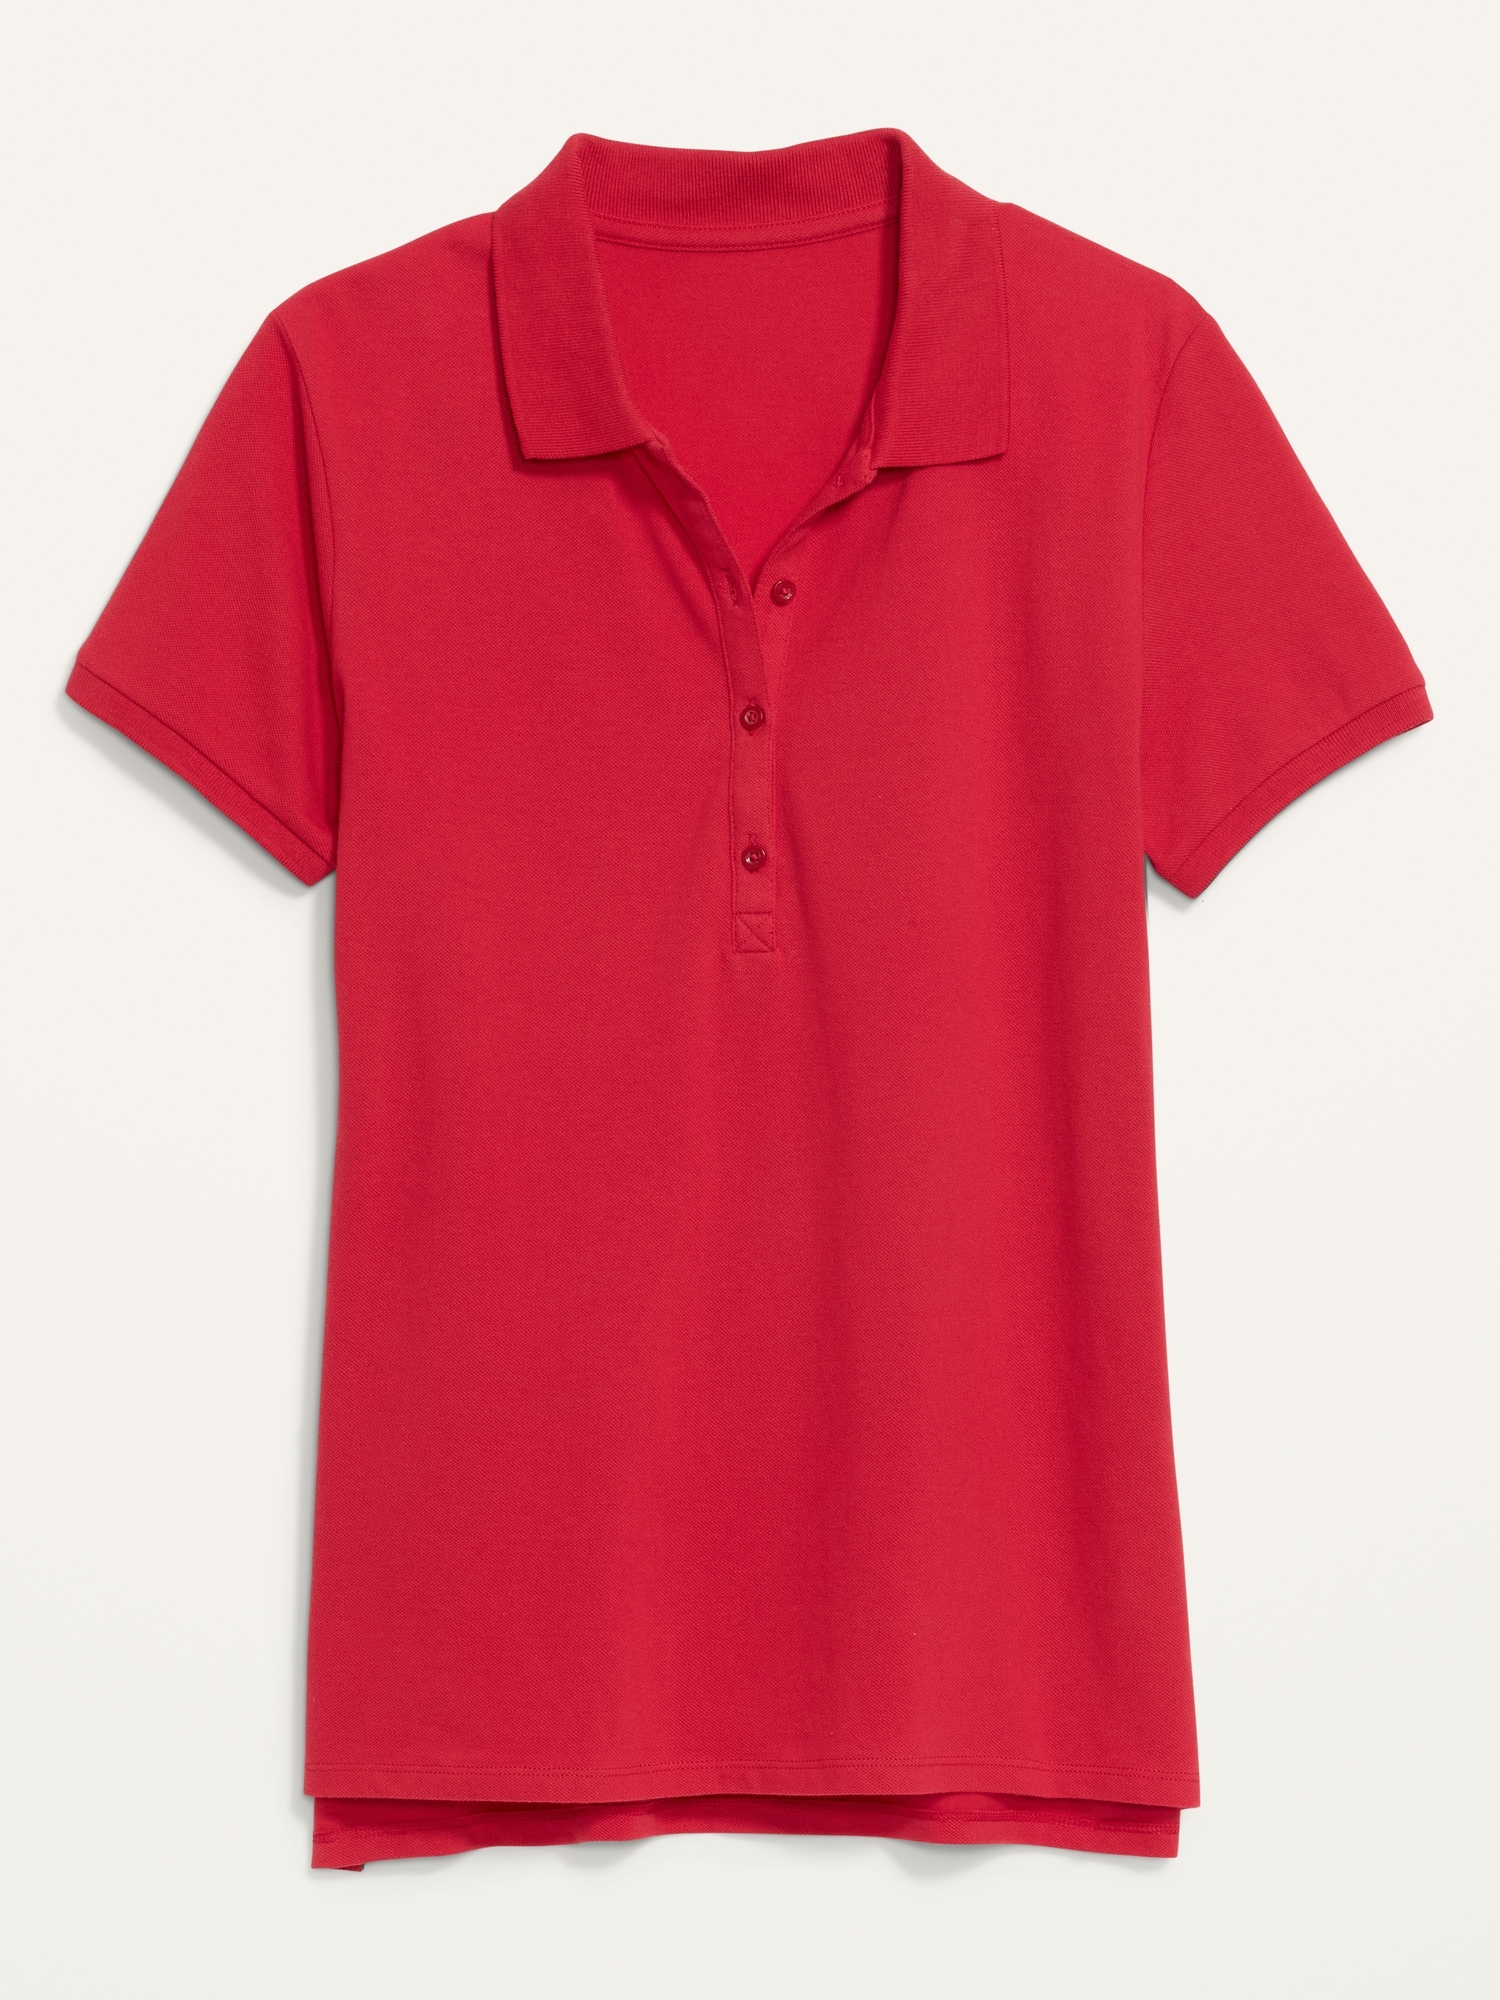 Incident, event Plumber Loved one Uniform Pique Polo Shirt for Women | Old Navy